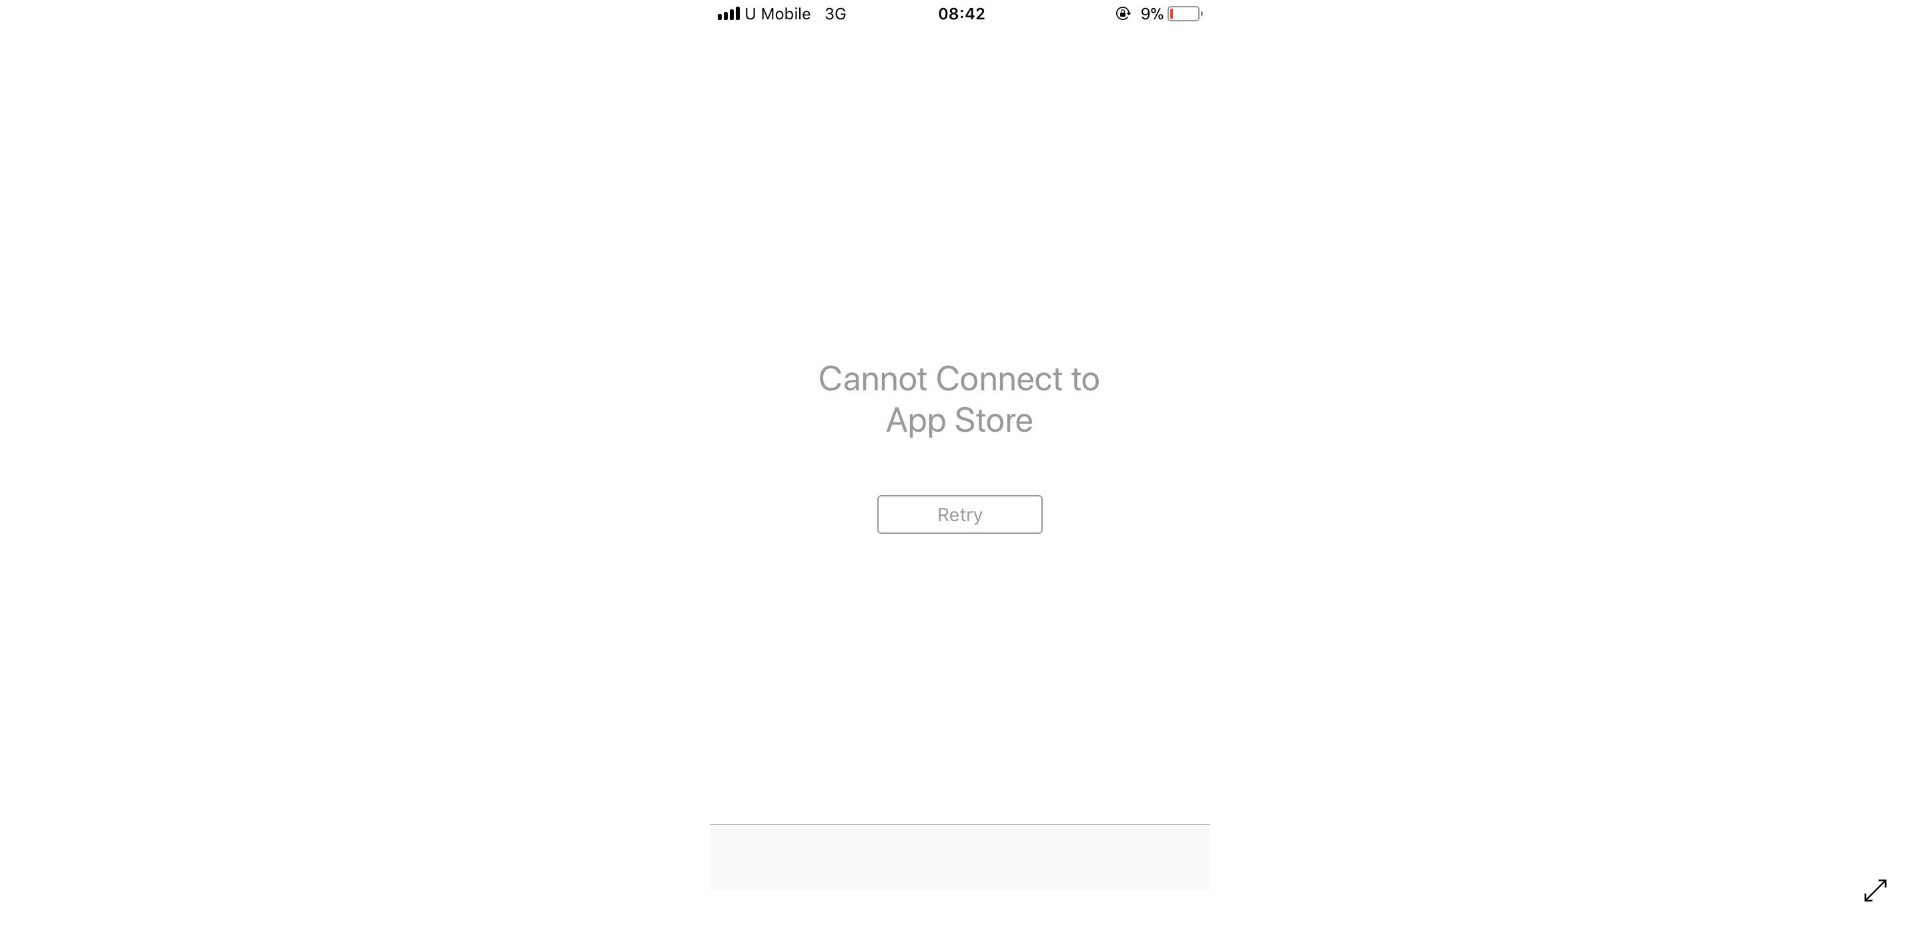 [Update: Apple Music down] App Store down and not working? Some users cannot connect to App Store